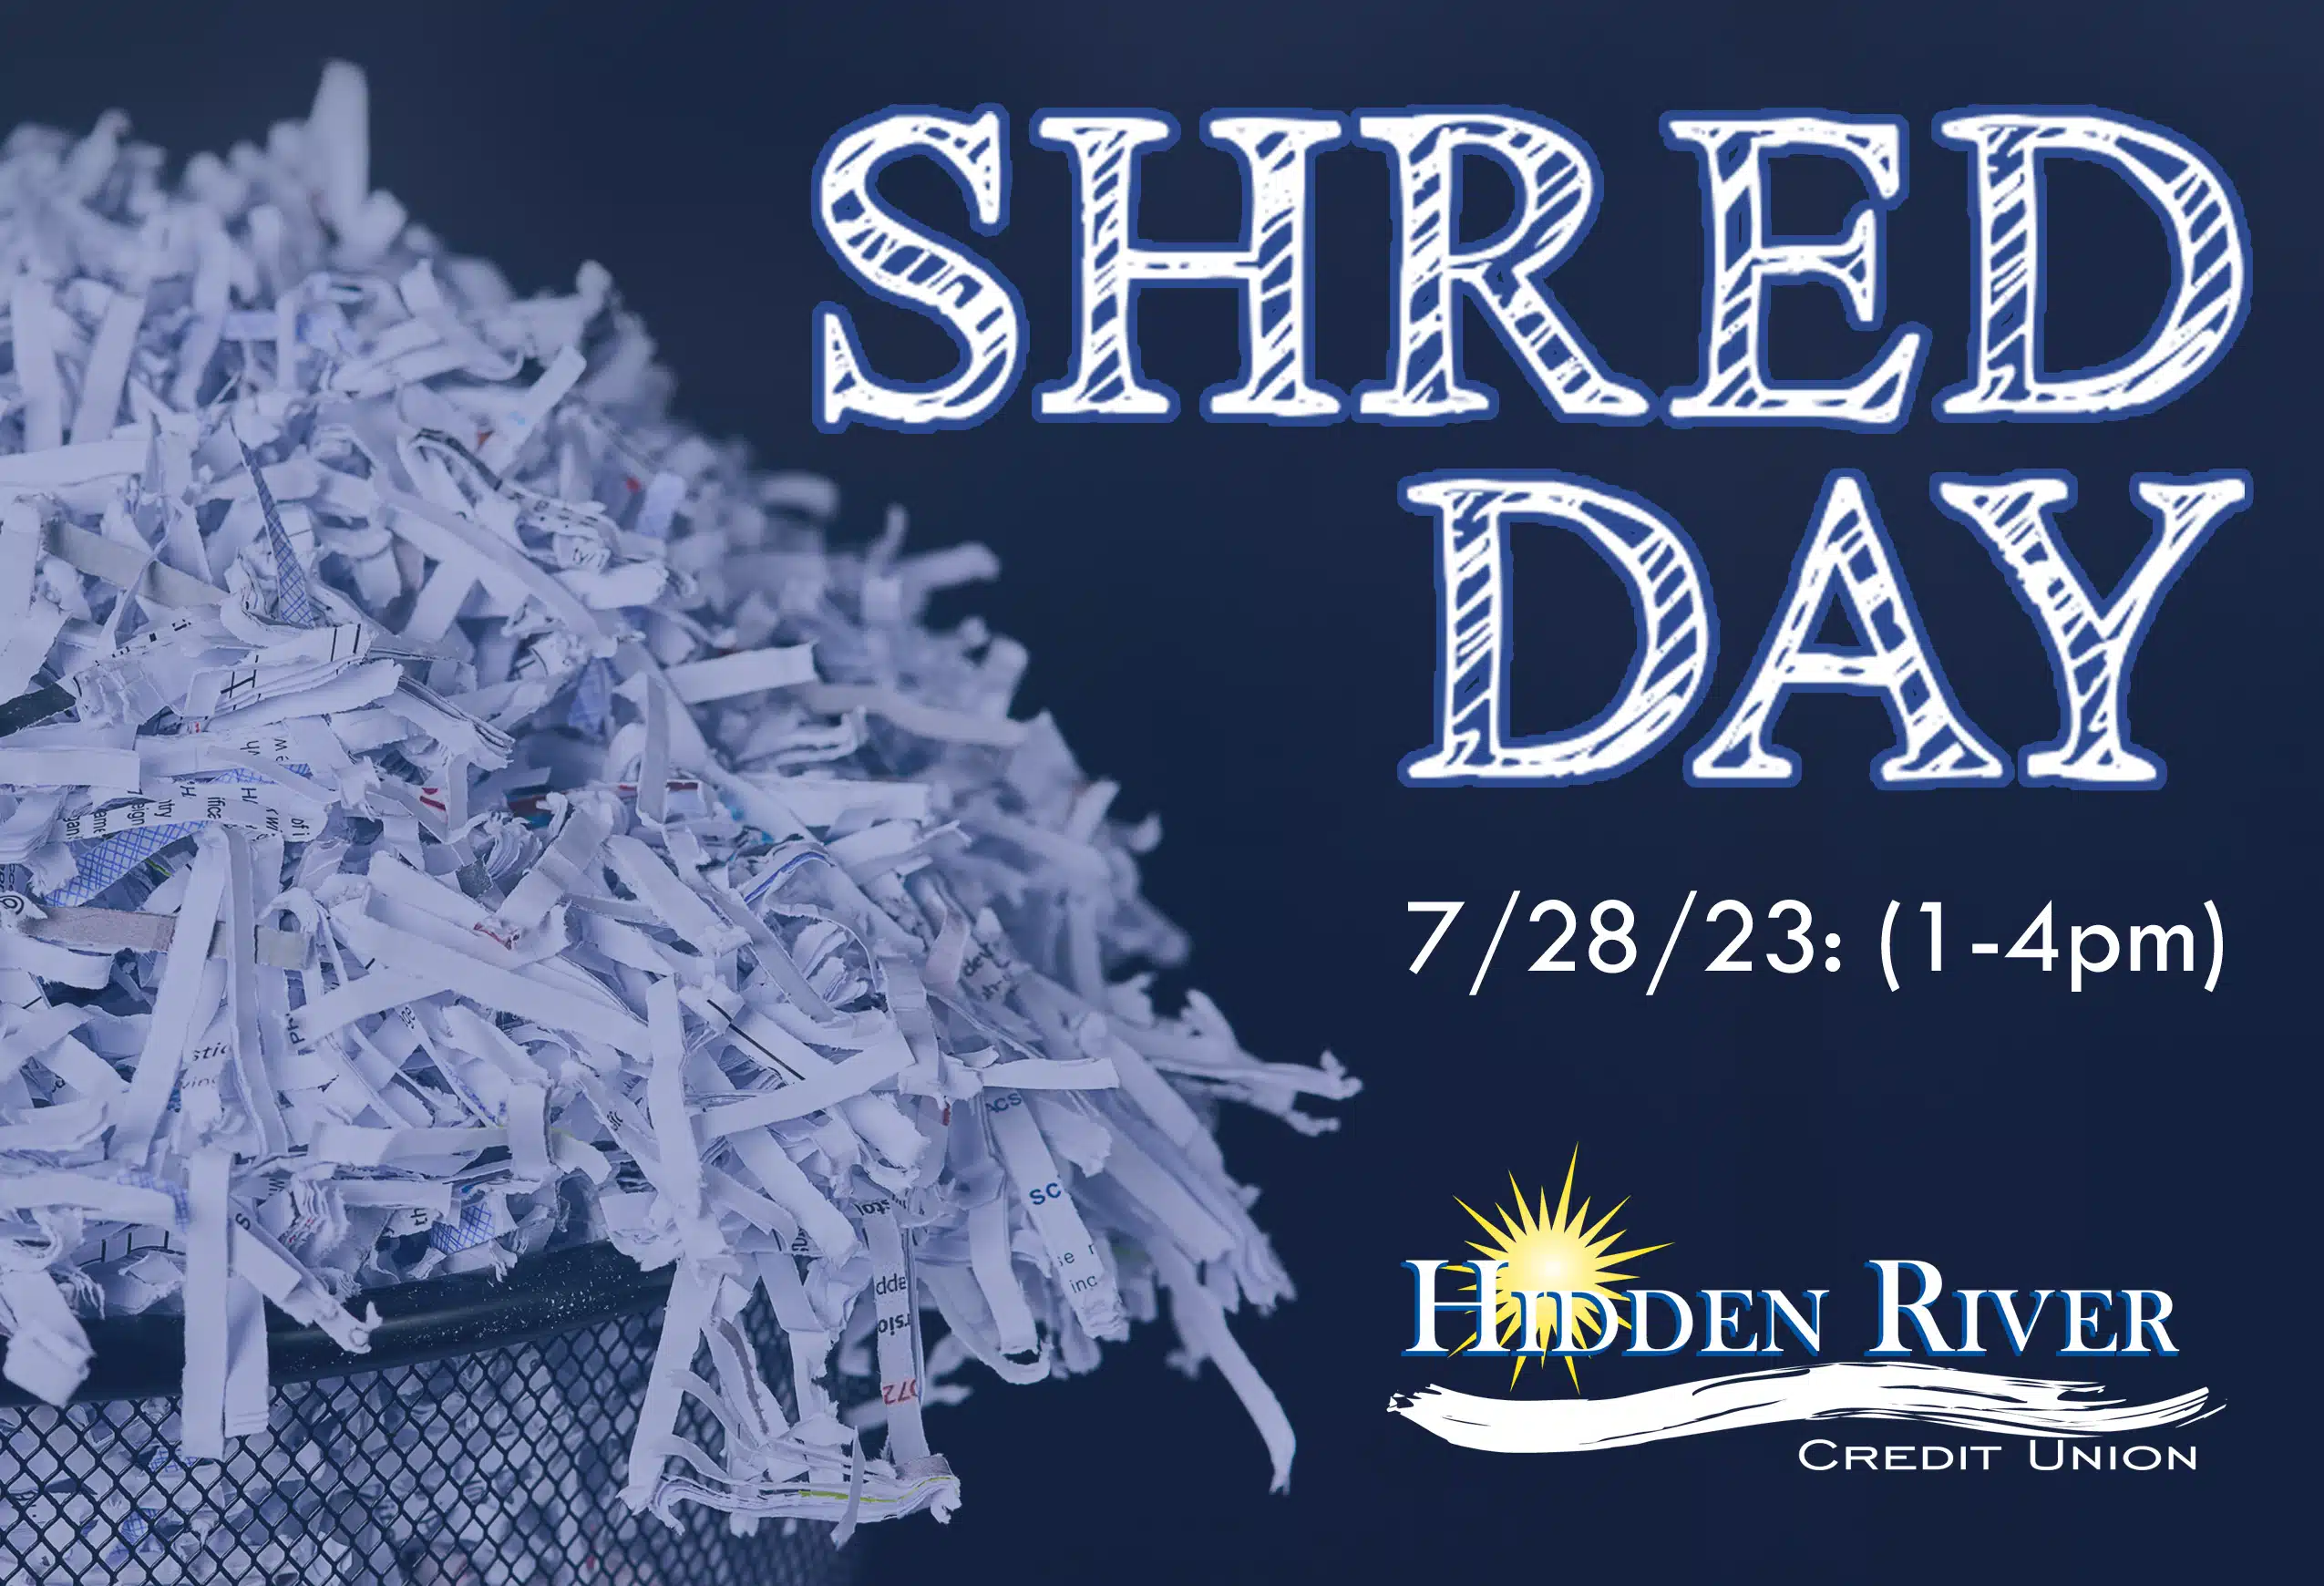 dark blue background with a trashcan full of shredded white paper on the left hand side. On the right it has white words that say "Shred Day' 7/28/23 (1-4pm). Under that is the HRCU logo